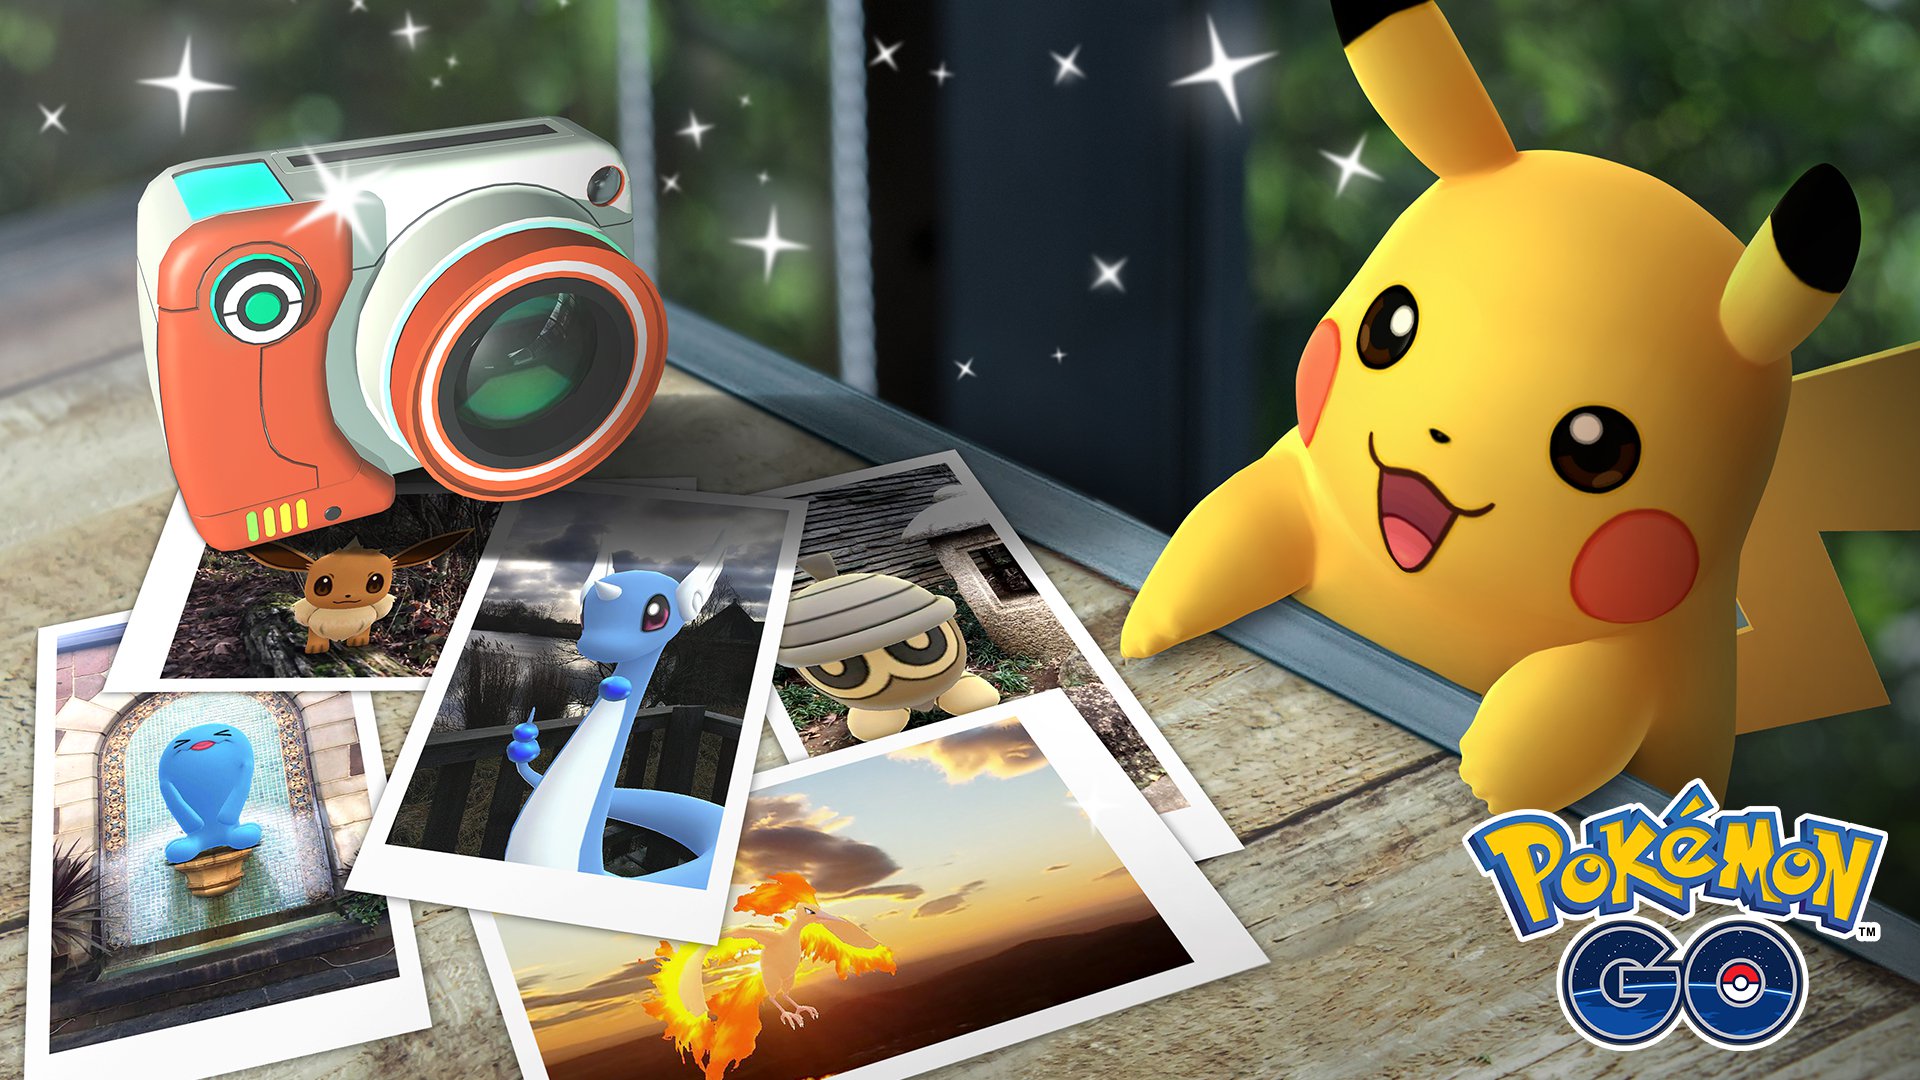 Pokemon Go Jump Start Research Quests tasks rewards and more